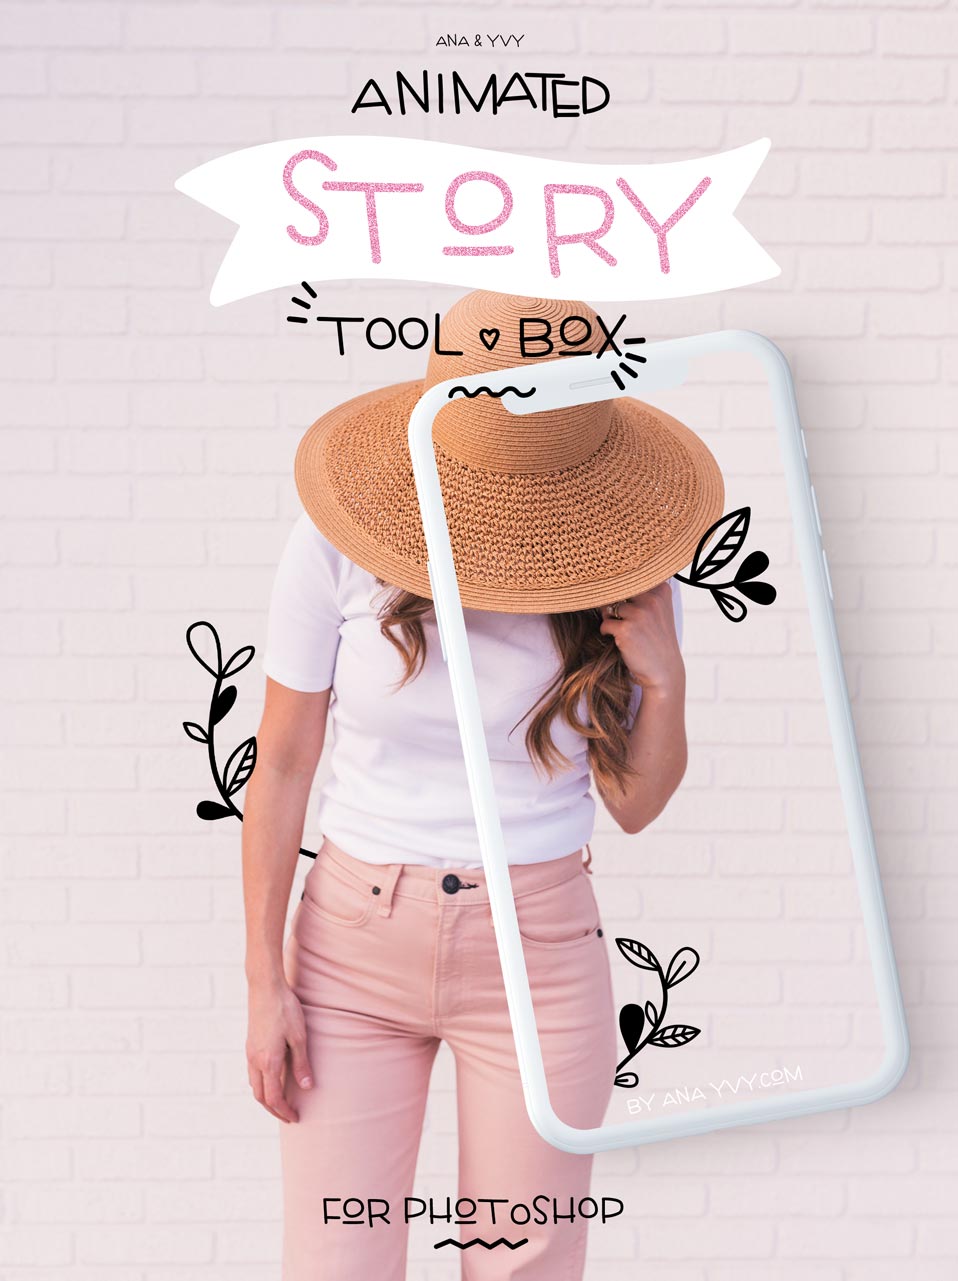 Animated Clipart | Instagram Story Toolbox No. 1 - ANA & YVY